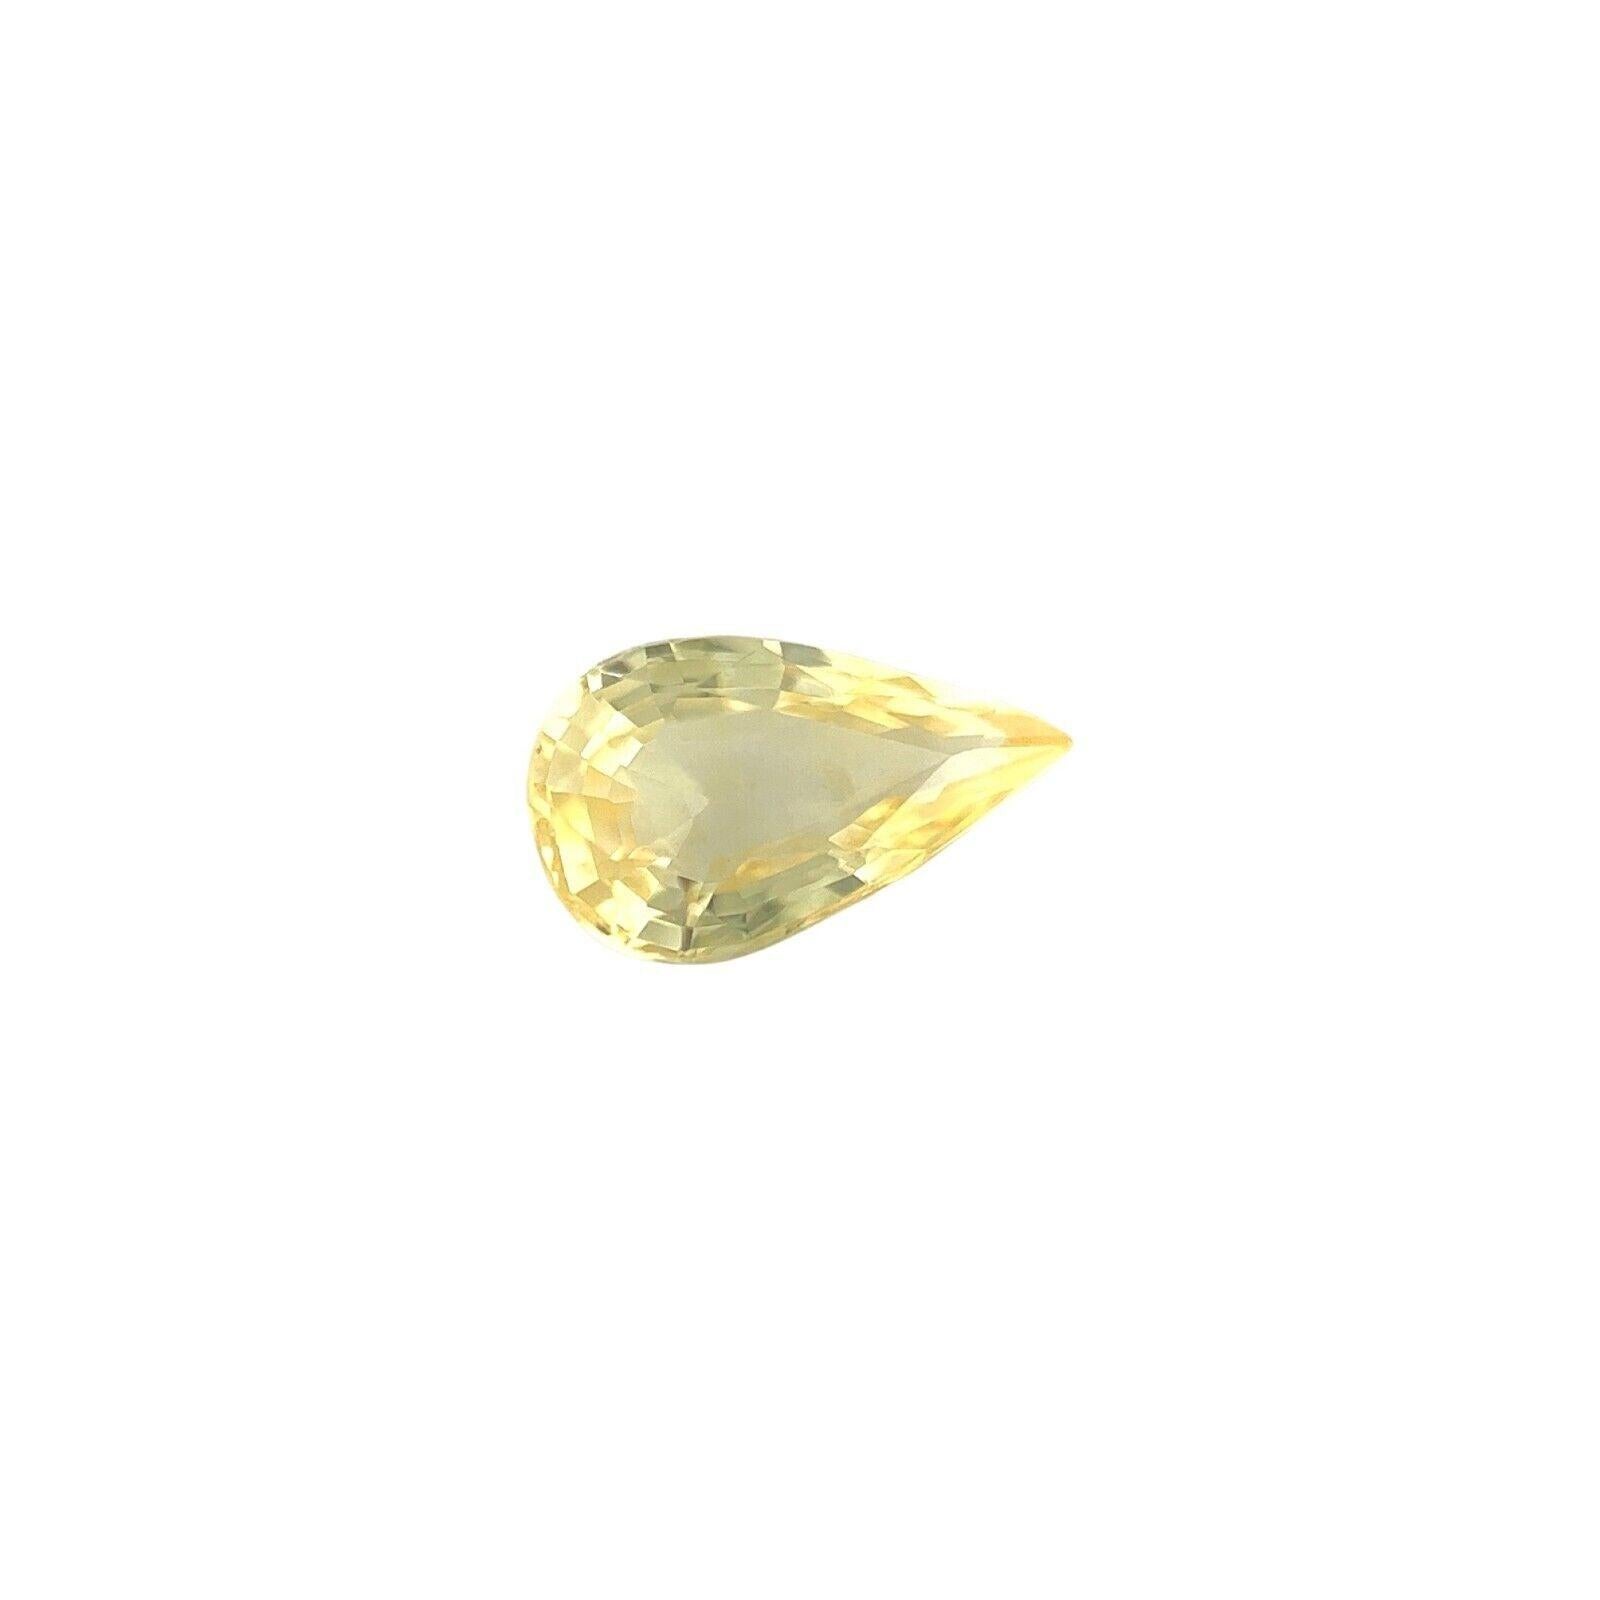 GIA Certified 1.28Ct Ceylon Sapphire Untreated Vivid Yellow Pear Cut

Natural GIA Certified Untreated Yellow Sapphire Gemstone.
1.28 Carat unheated sapphire with a beautiful vivid yellow colour.
Also has excellent clarity, a very clean stone,